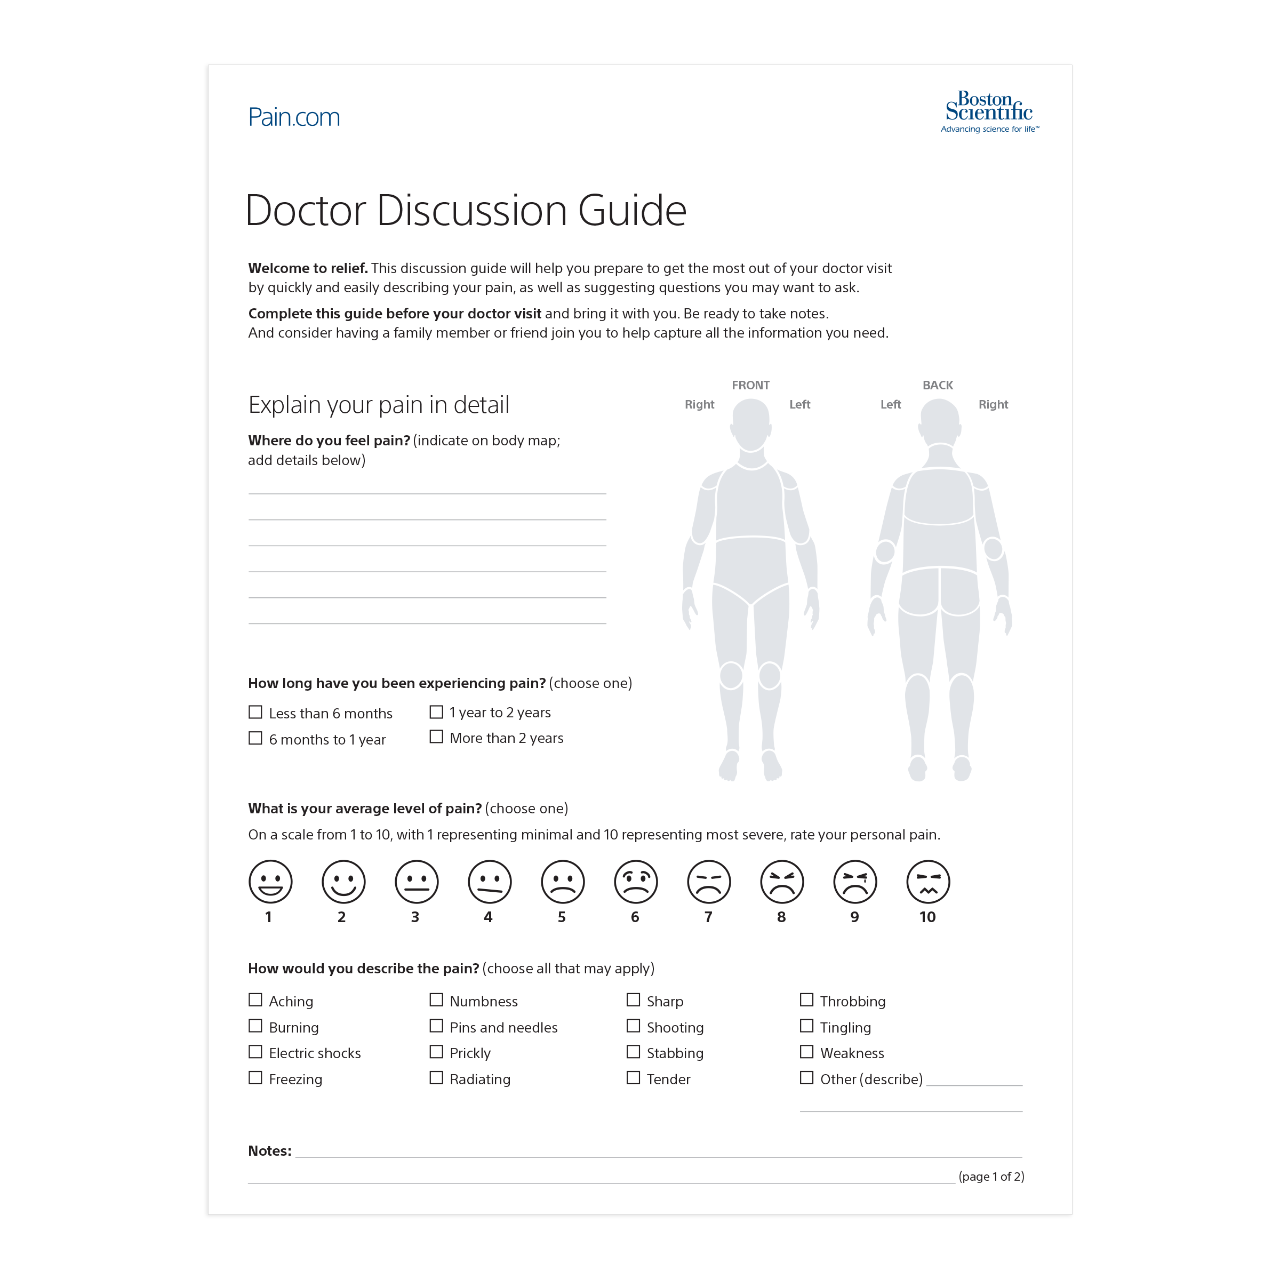 The Pain.com Doctor Discussion Guide